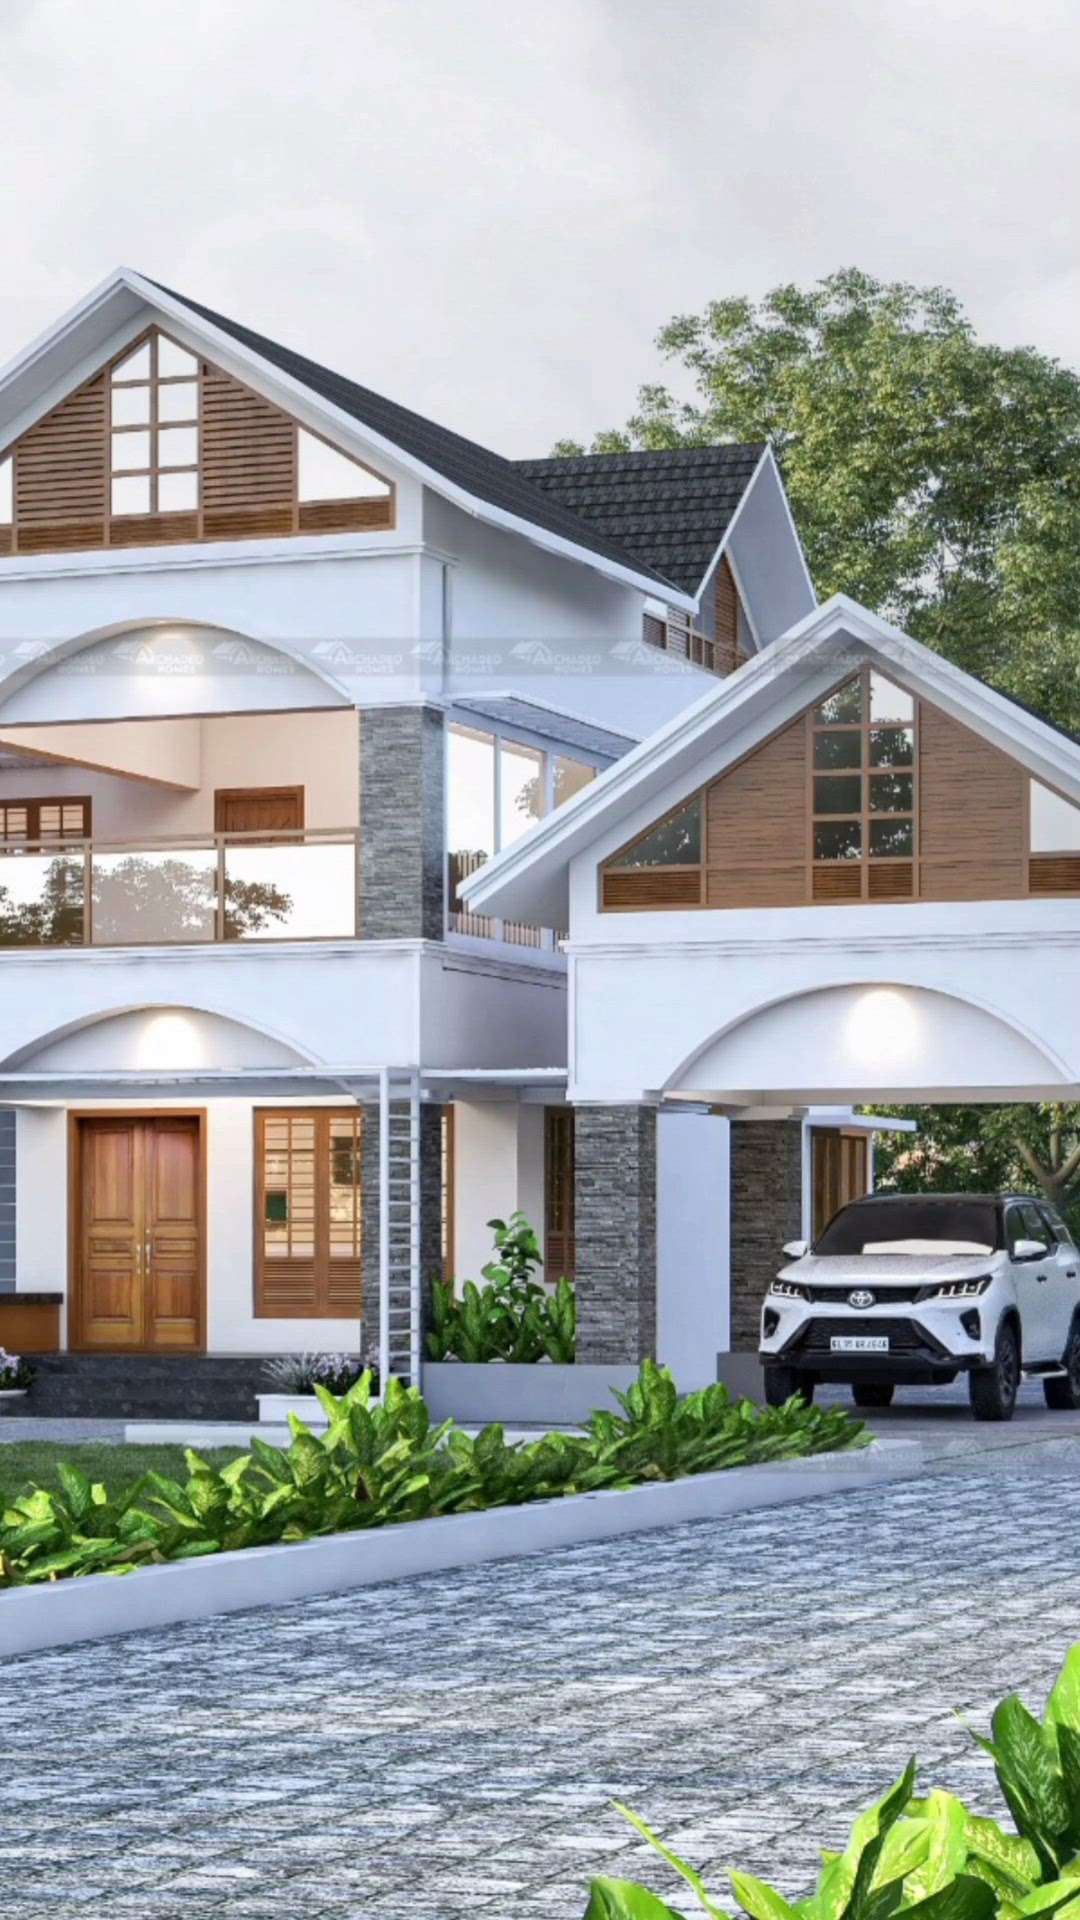 New House Design 🏡

Each designs speaks unique story 🏕
To create your own...

Contact us:
Phone: +91 6282561035
Website: www.archadeohomes.com

Services :

Architectural Design
Construction
Structural Design
Interior Design #HouseConstruction #KeralaStyleHouse